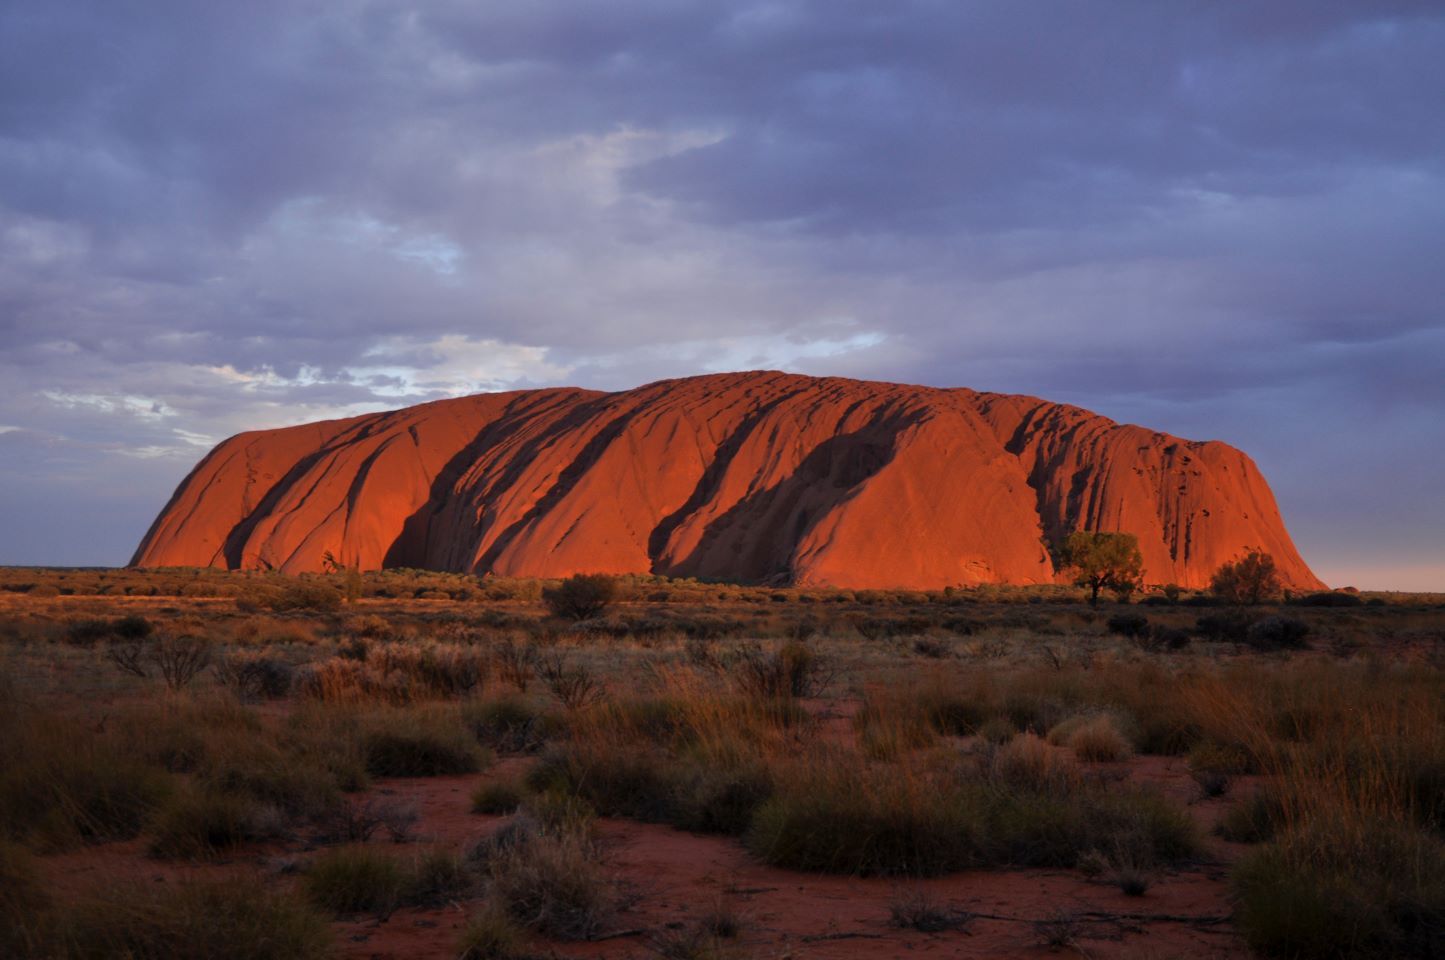 One of the most iconic Australian sites, the Ayers Rock